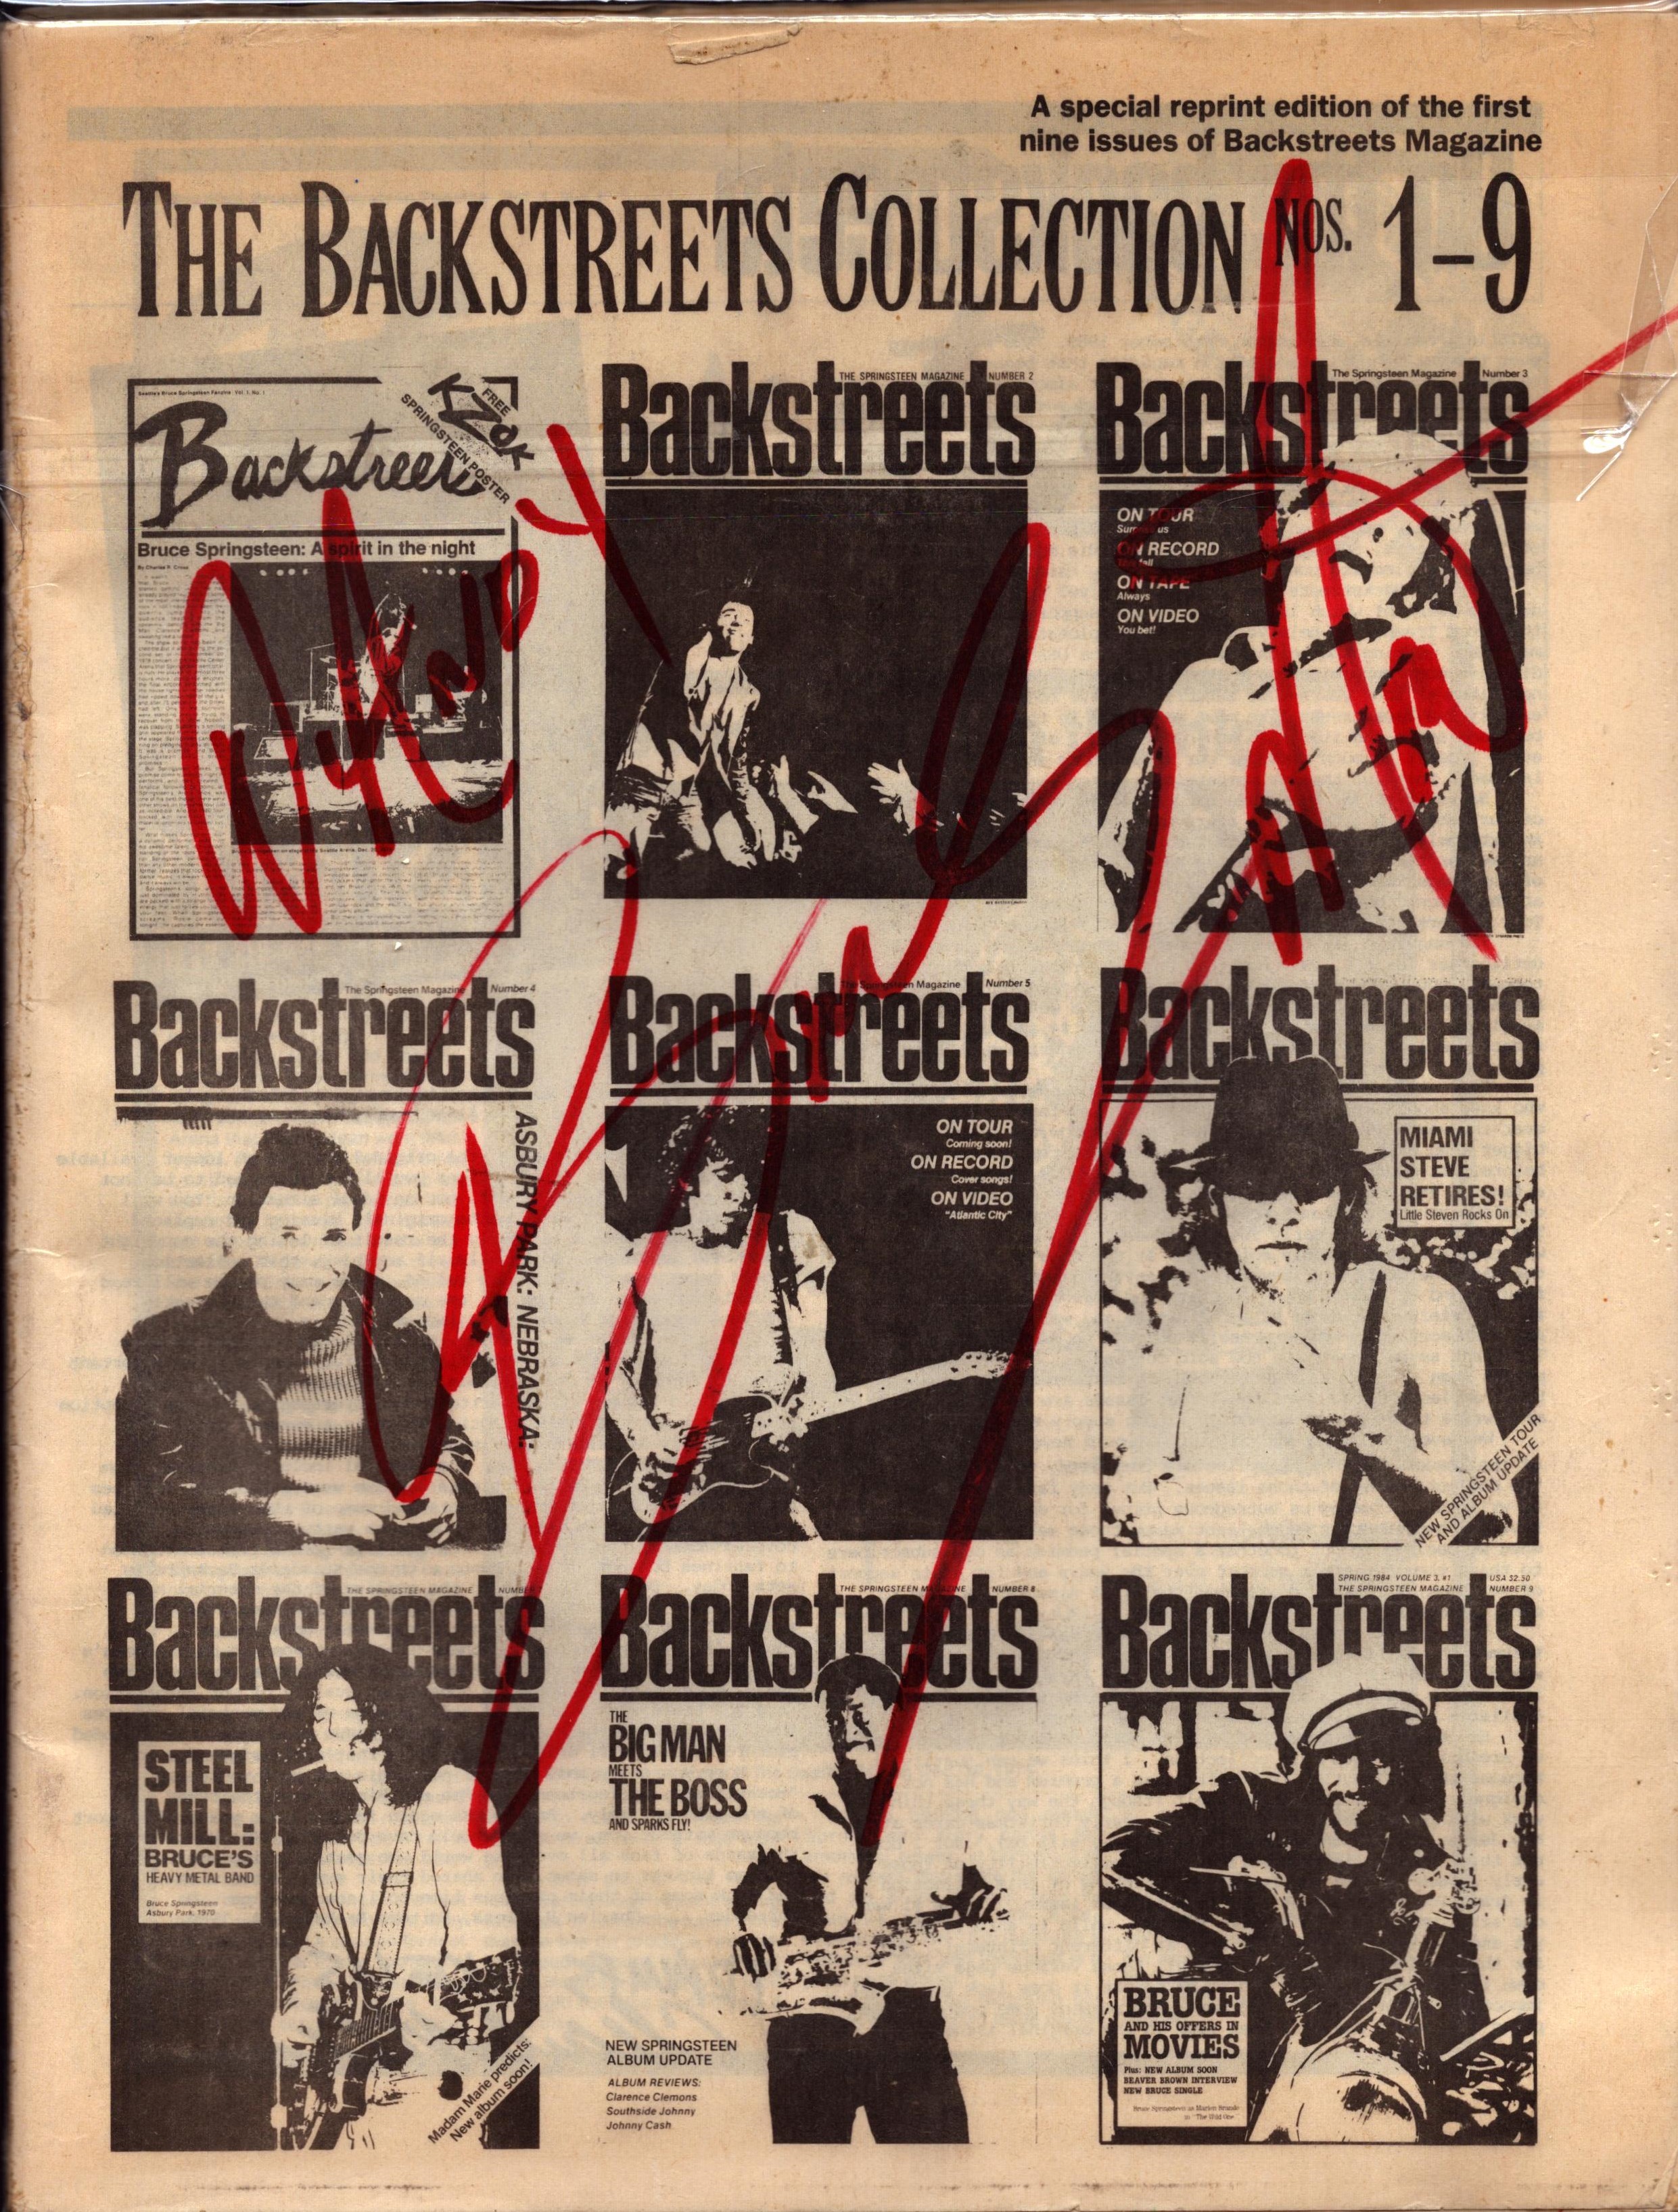 Bruce Springsteen signed Backstreets No 1-9 reprint magazine live signature on front page. Good